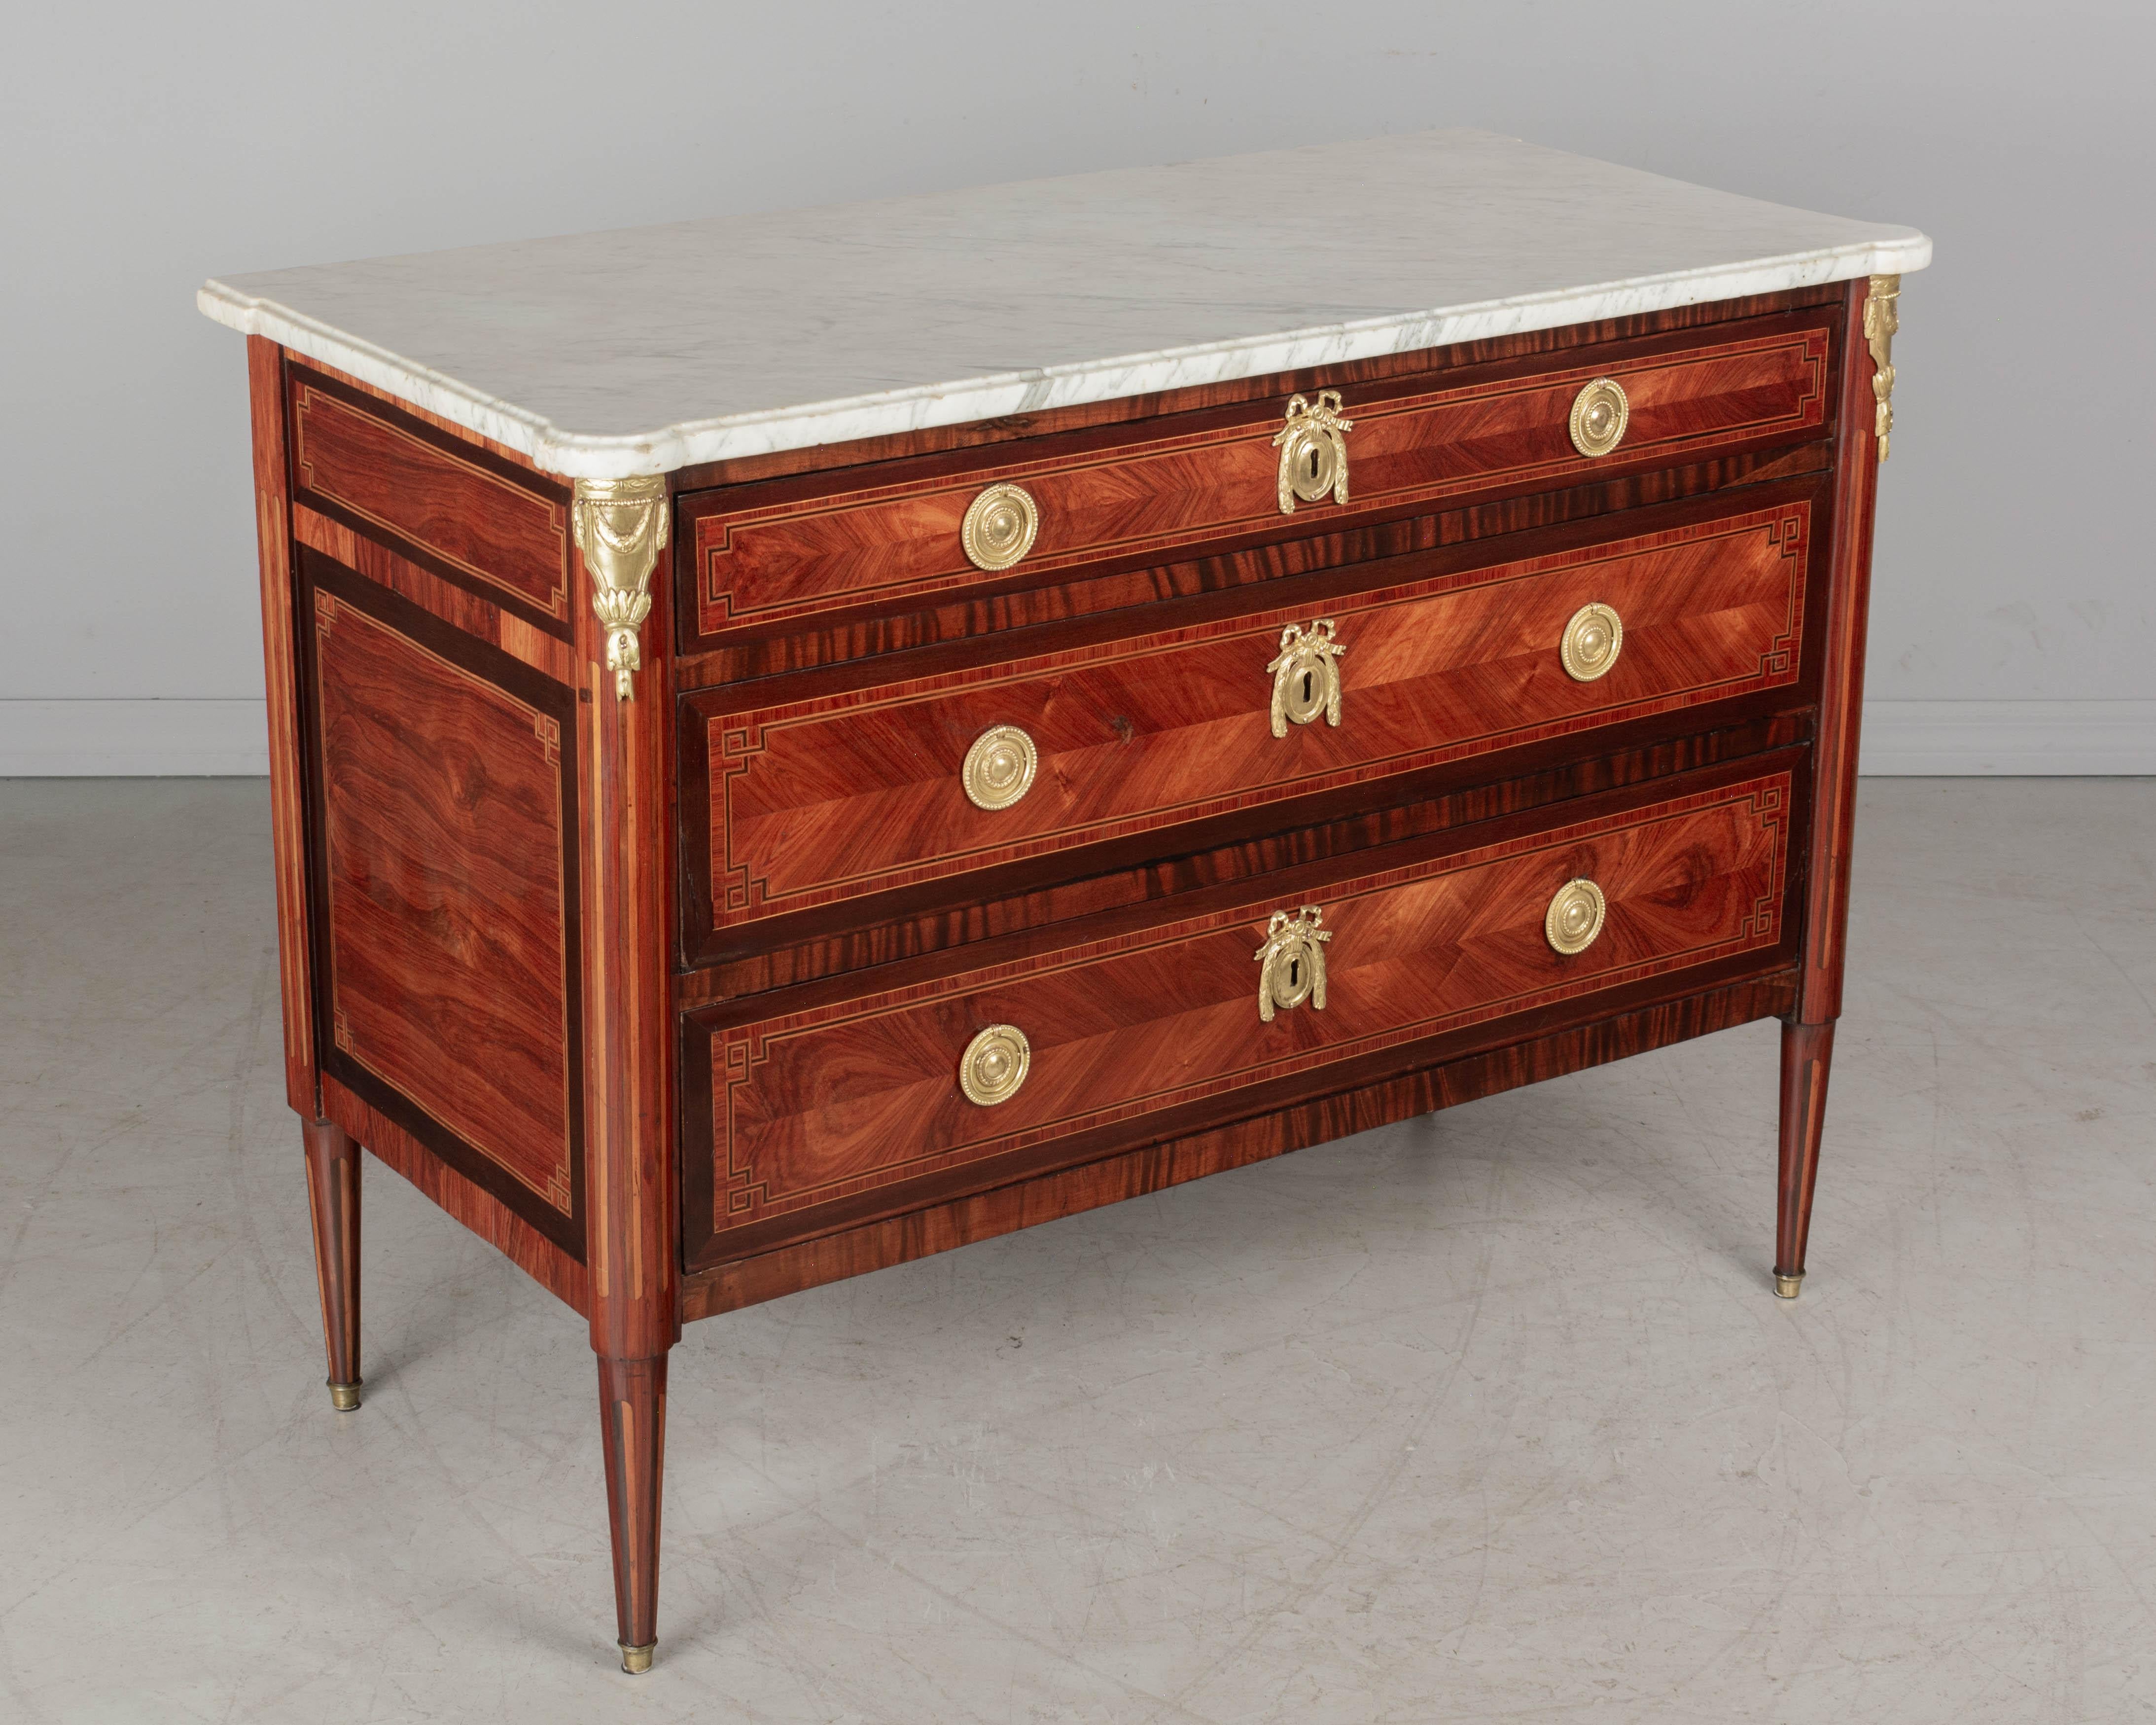 A fine 18th century French Louis XVI marquetry commode, expertly crafted by master ébéniste Jean-Baptiste Lependu from solid oak secondary wood with tulipwood, kingwood and satinwood veneers, and original shaped white veined marble top. Three